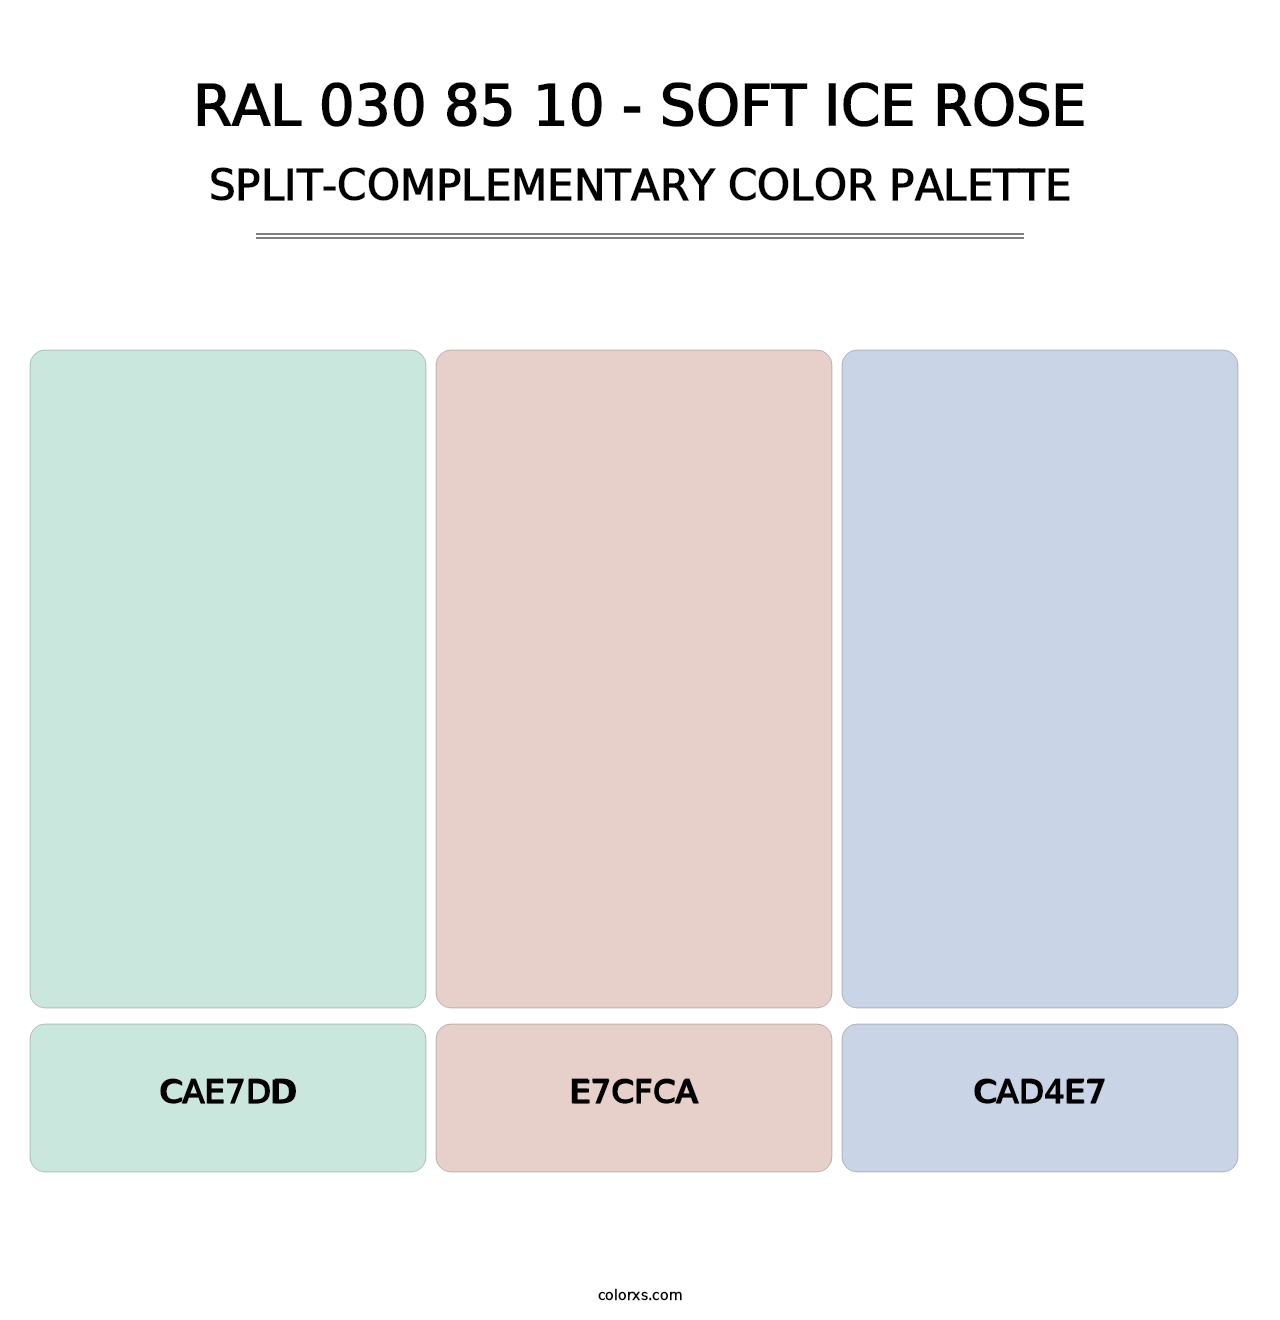 RAL 030 85 10 - Soft Ice Rose - Split-Complementary Color Palette